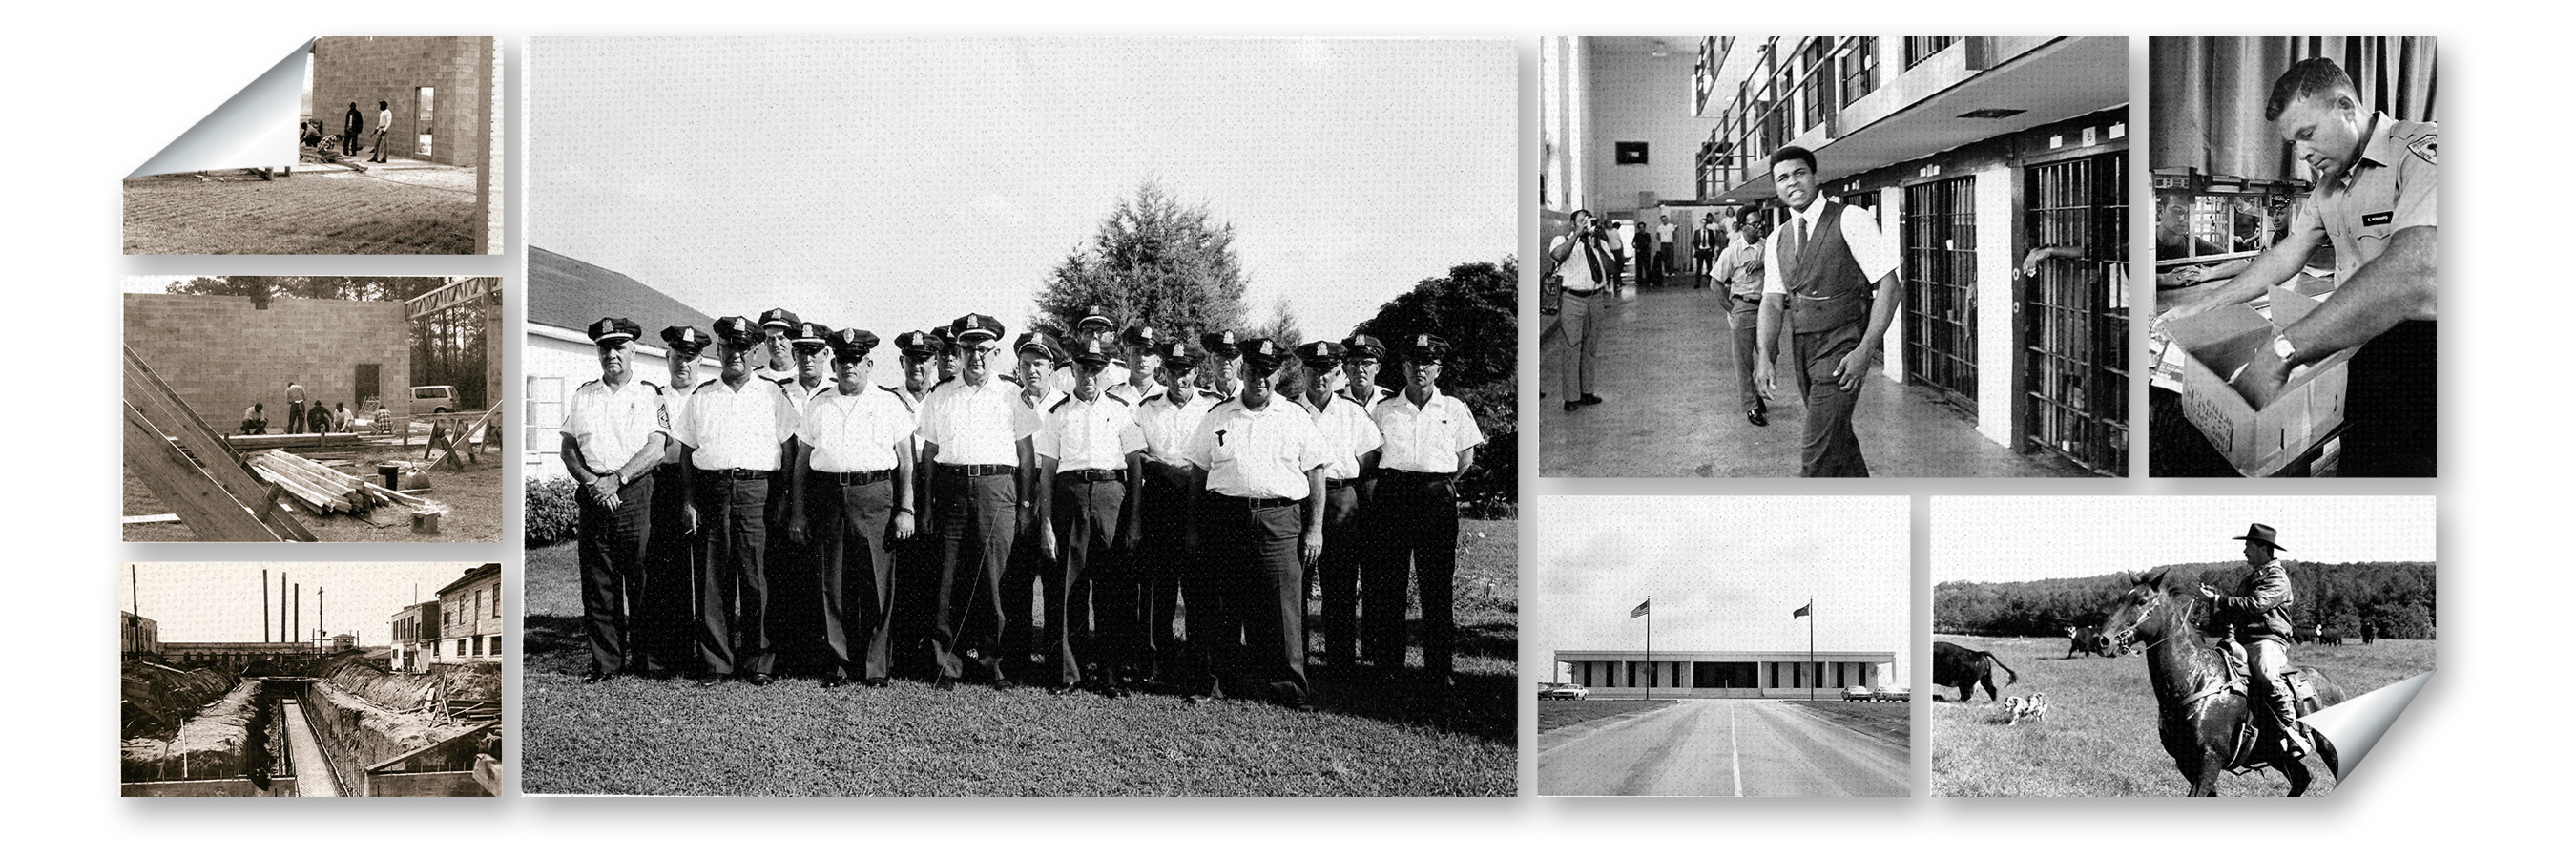 SCDC Historical Photo Collage of a building being built, a trench, original Correctional Officer uniforms, an employee in front of cells, the front of the headquartes building, an officer getting papers out of a cardboard box, and an employee on a horse herding cattle.